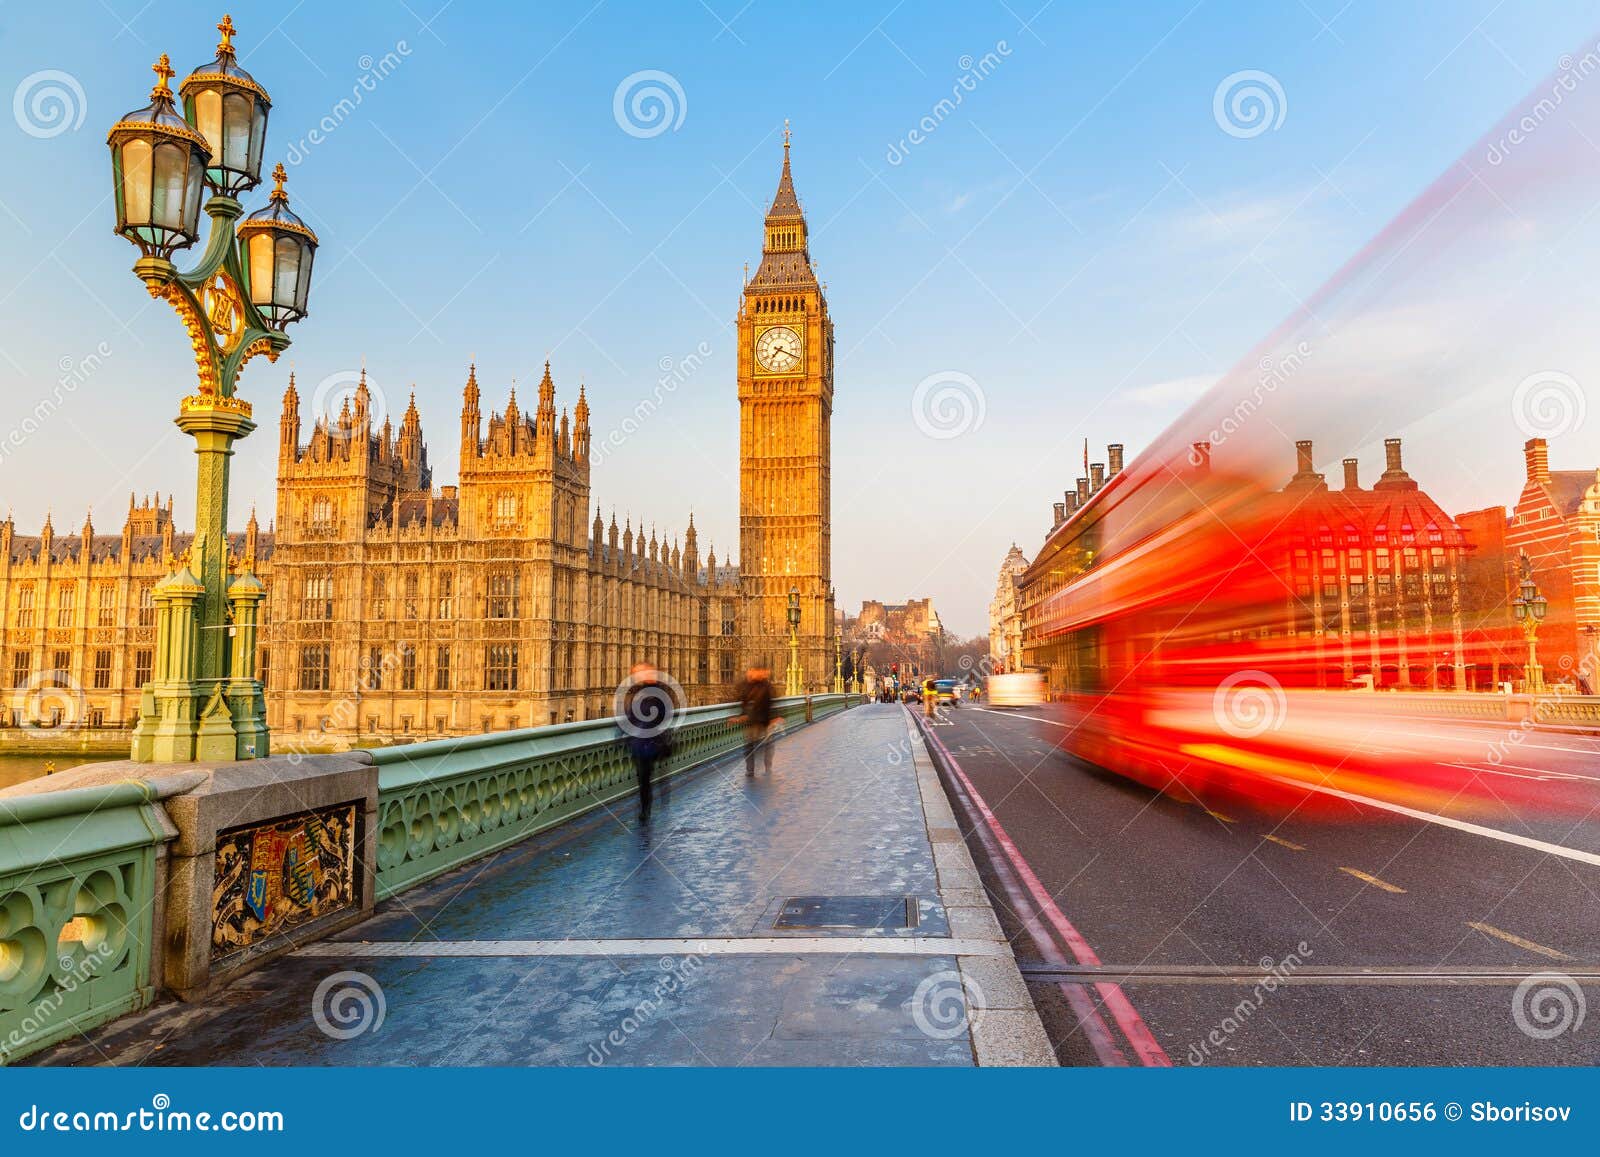 Big Ben and Red Double-decker Bus, London Stock Photo - Image of ...